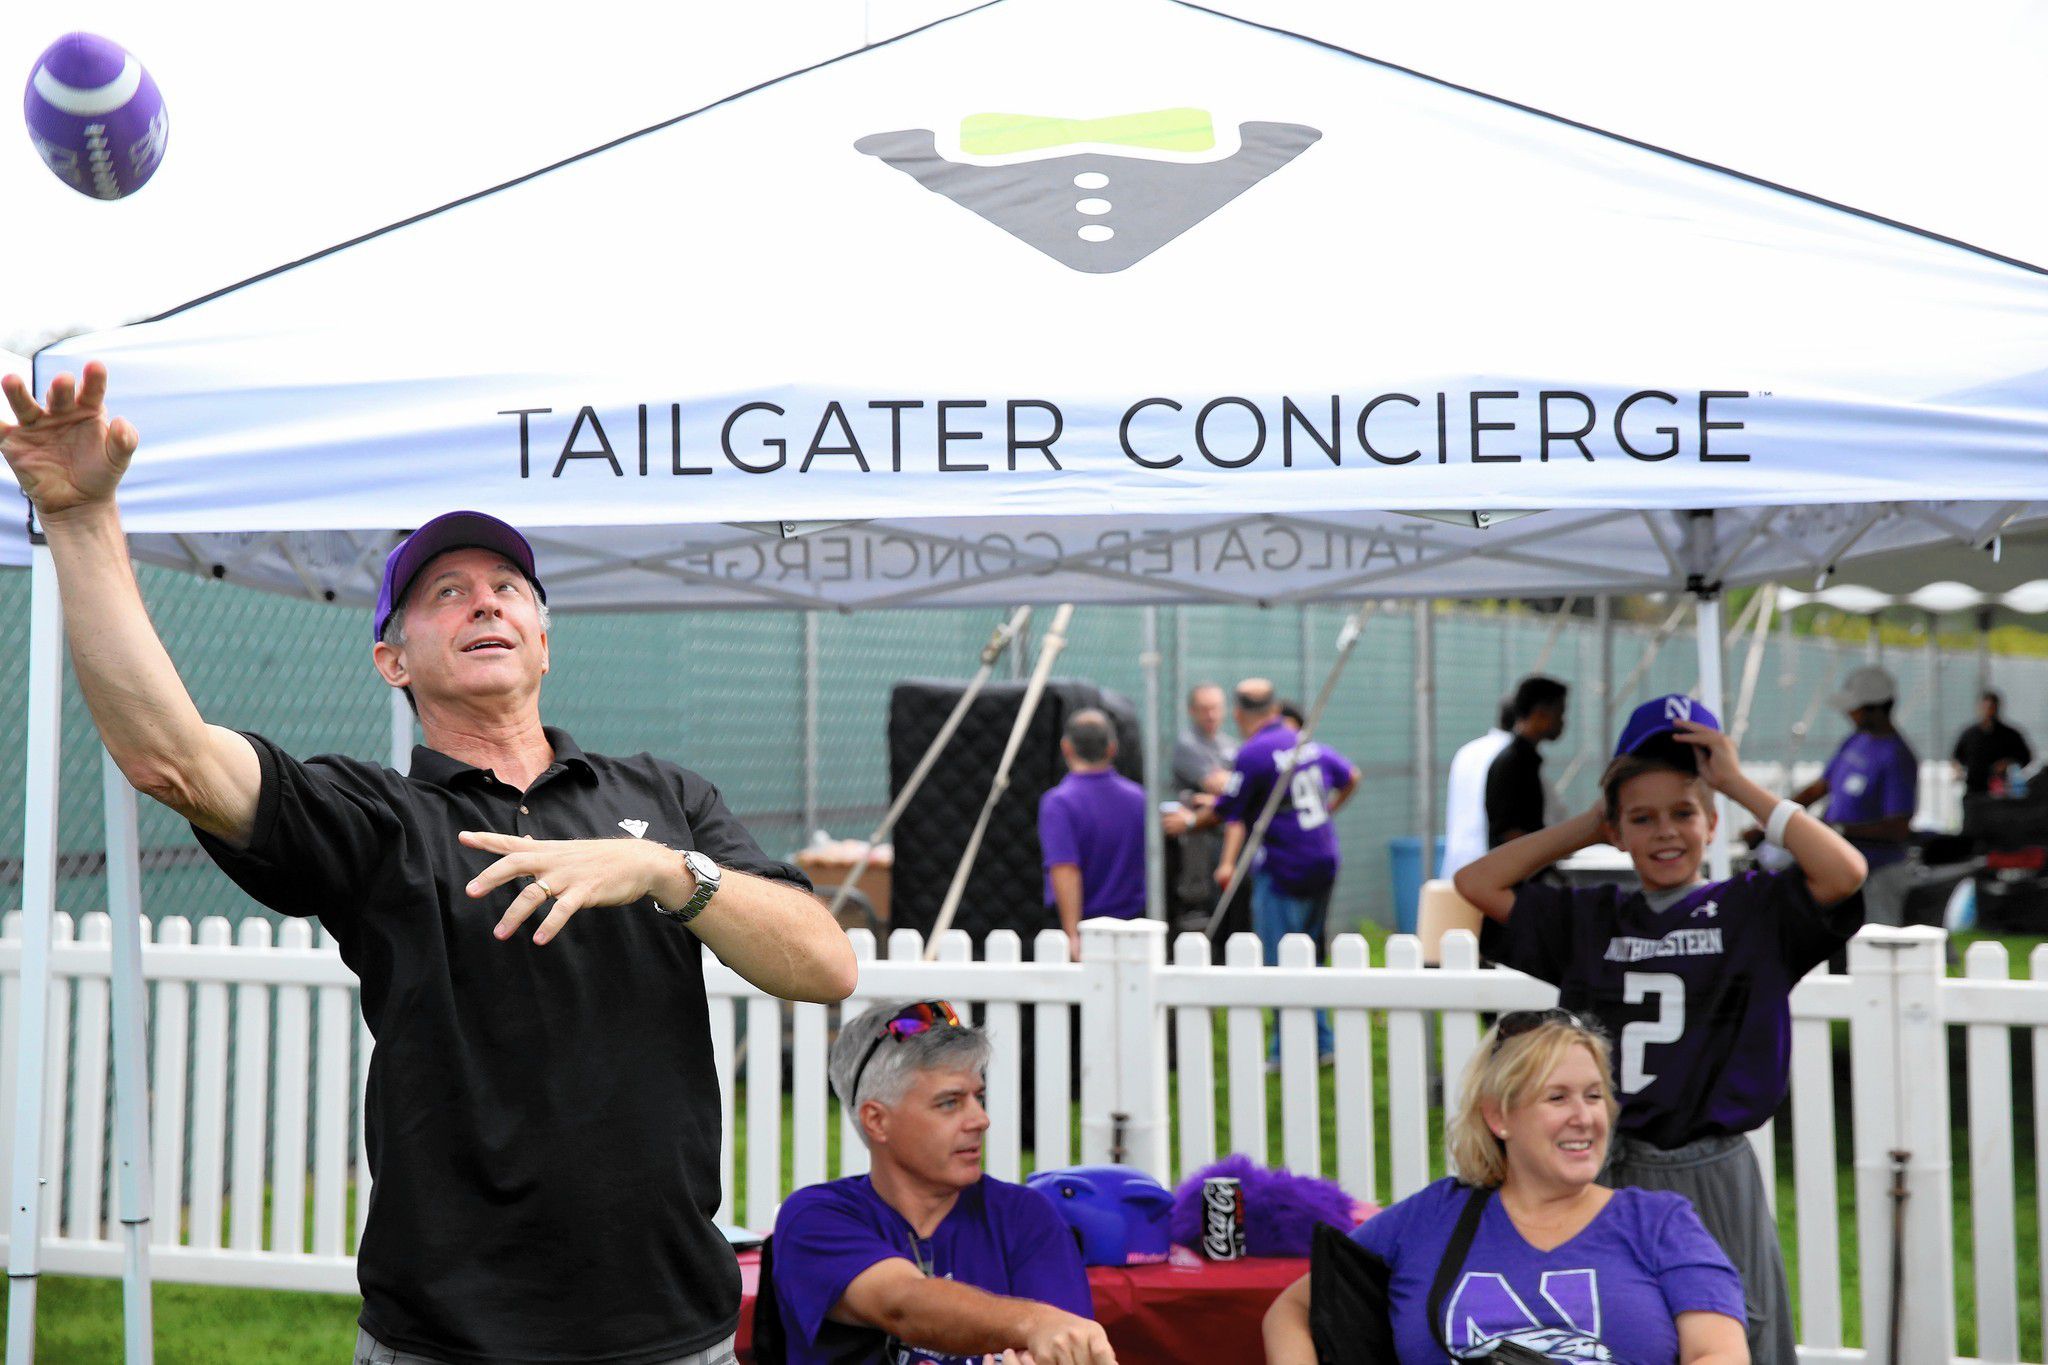 Tailgater Guide: University of Louisville - Tailgater Concierge